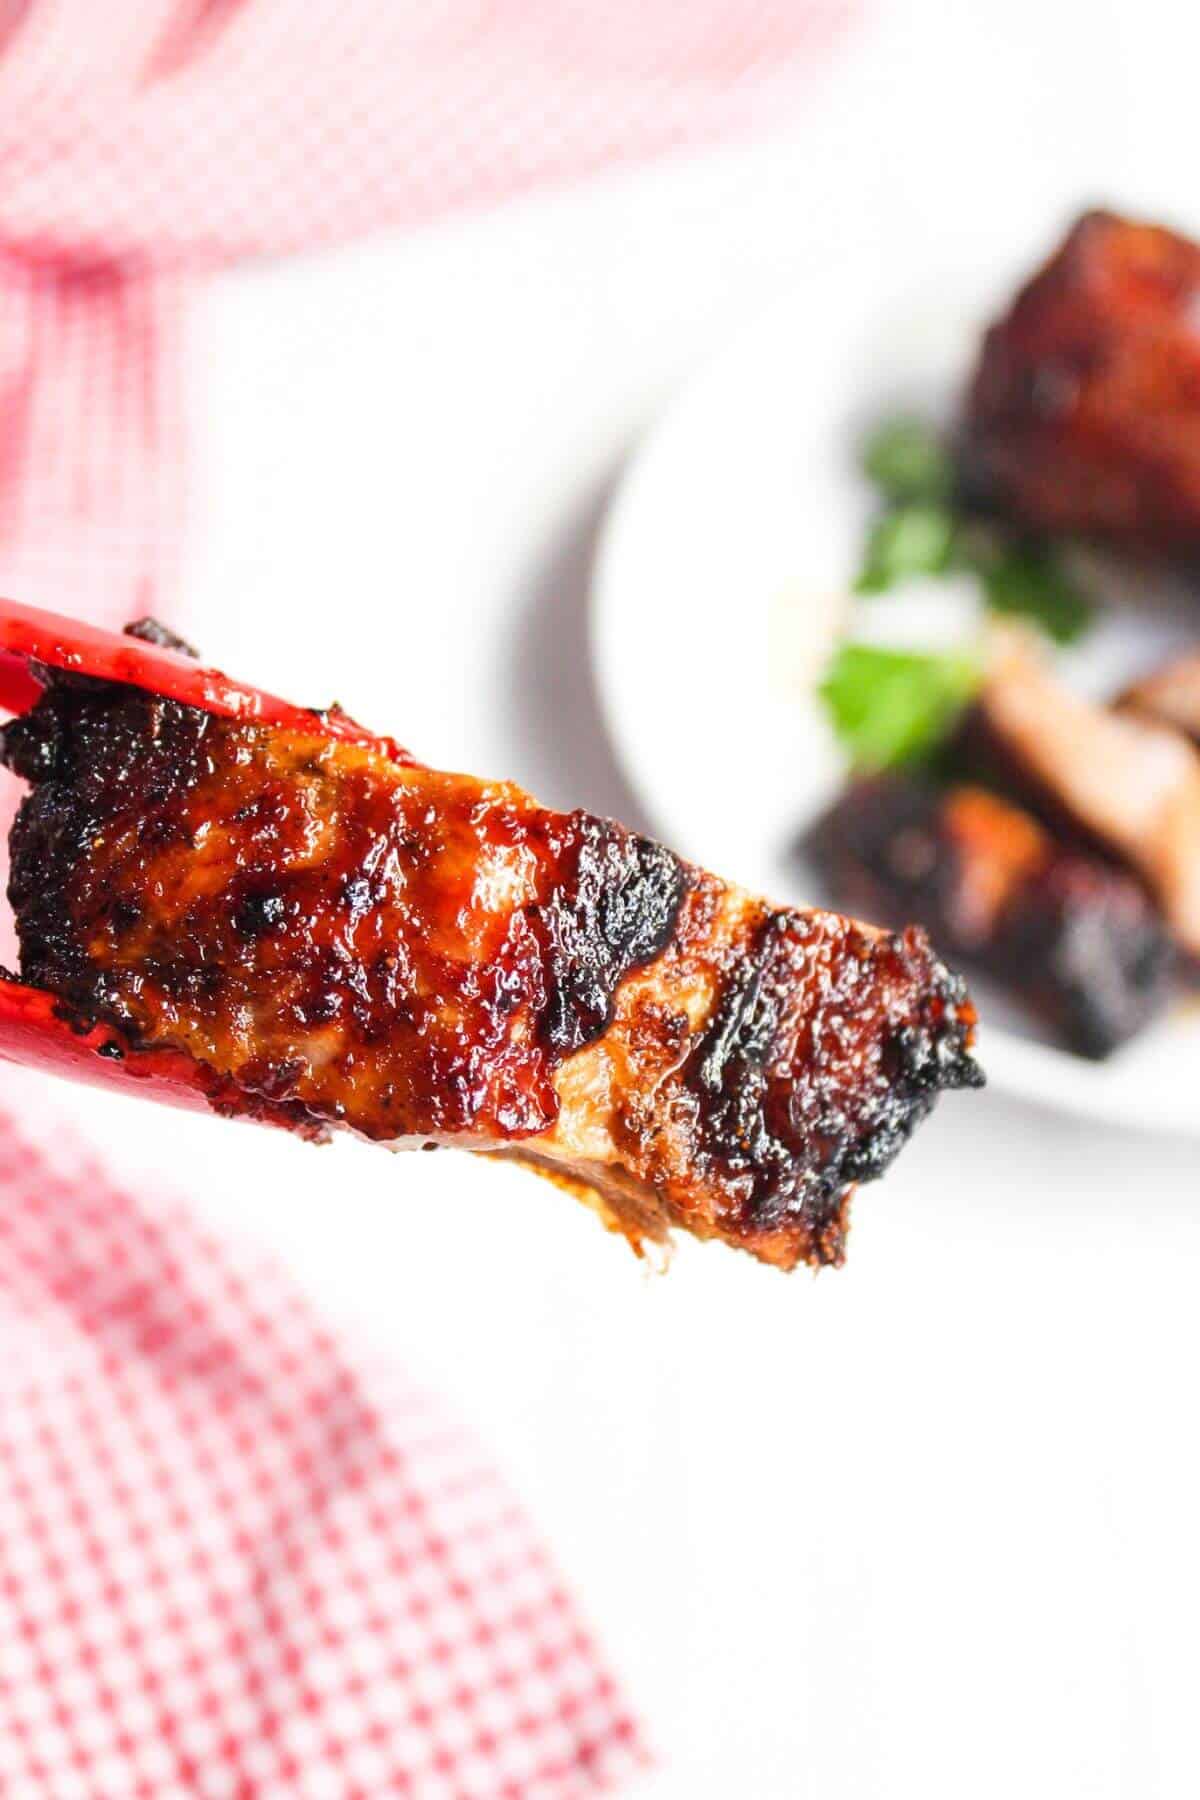 BBQ ribs on a plate with a red and white checkered napkin.